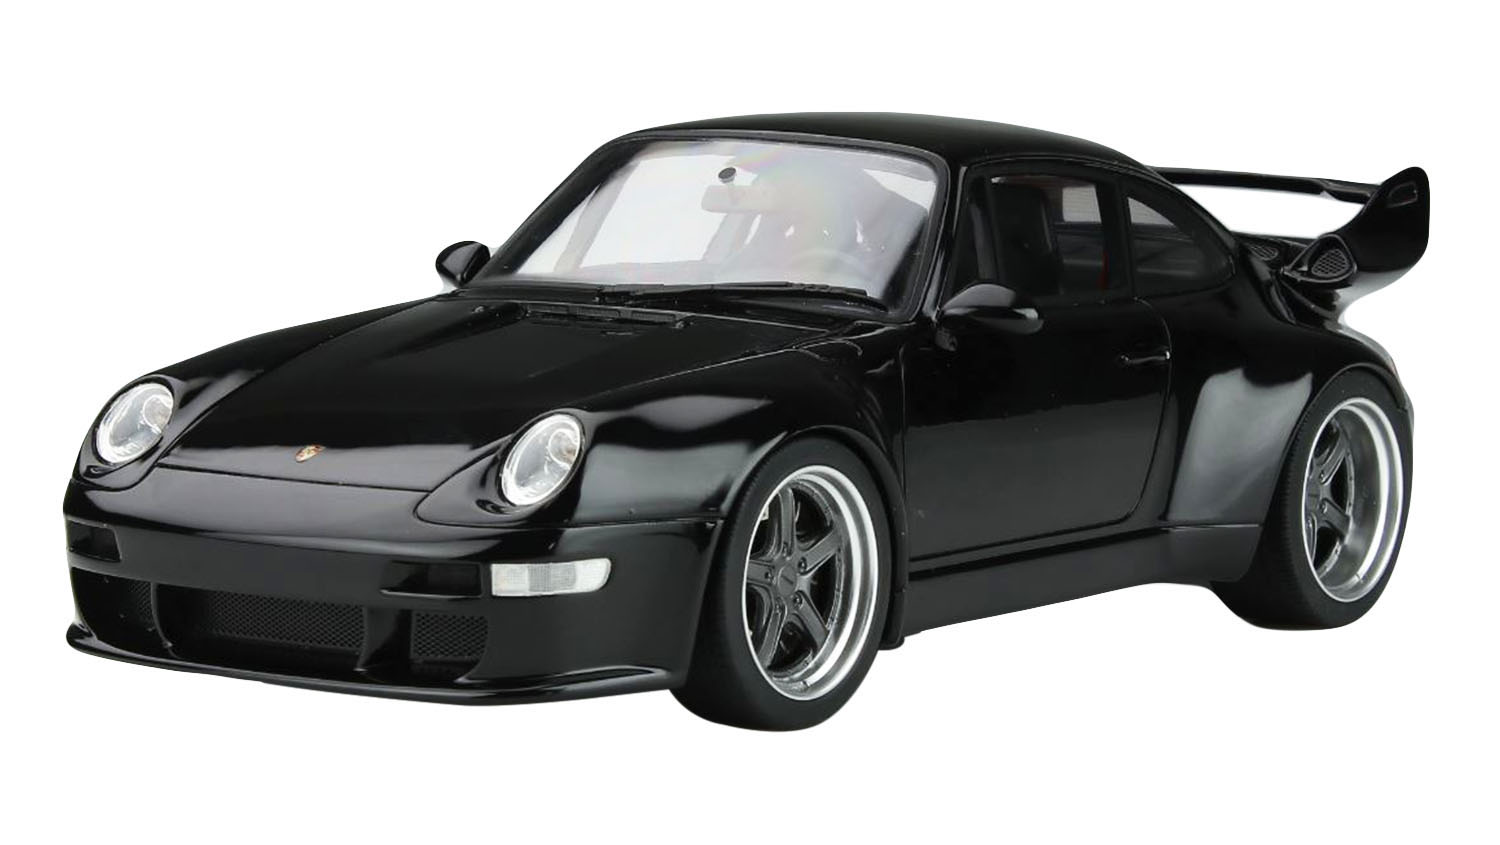 Porsche 993 400r Gunther Werks Black "asia Exclusive" Series Limited Edition To 402 Pieces Worldwide 1/18 Model Car By Gt Spirit For Kyosho